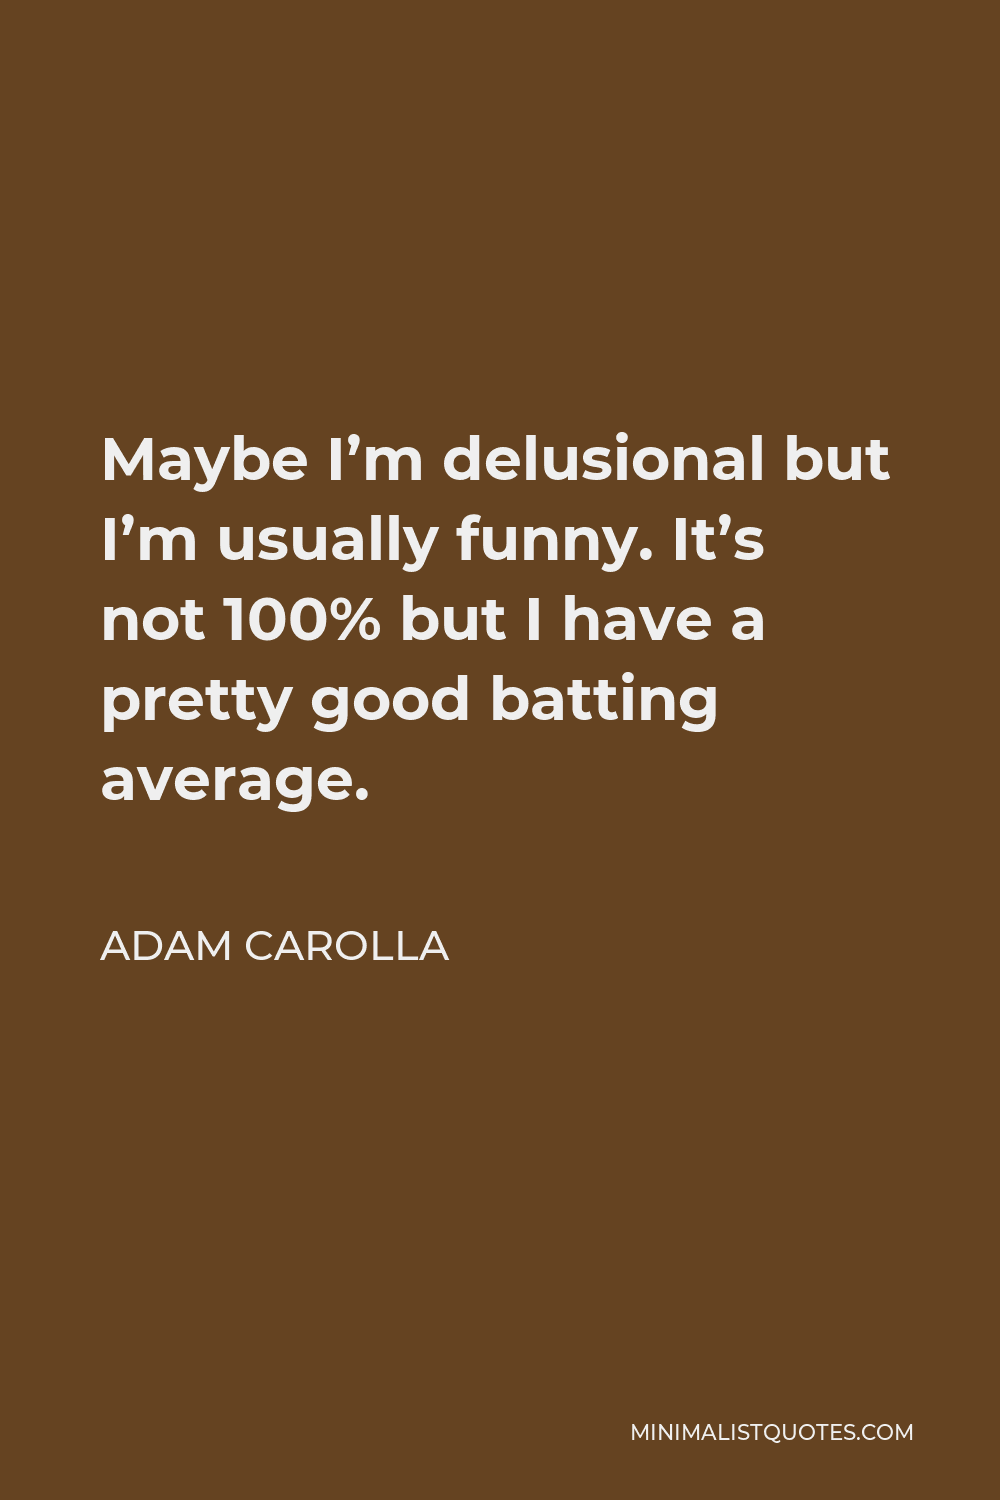 Adam Carolla Quote - Maybe I’m delusional but I’m usually funny. It’s not 100% but I have a pretty good batting average.